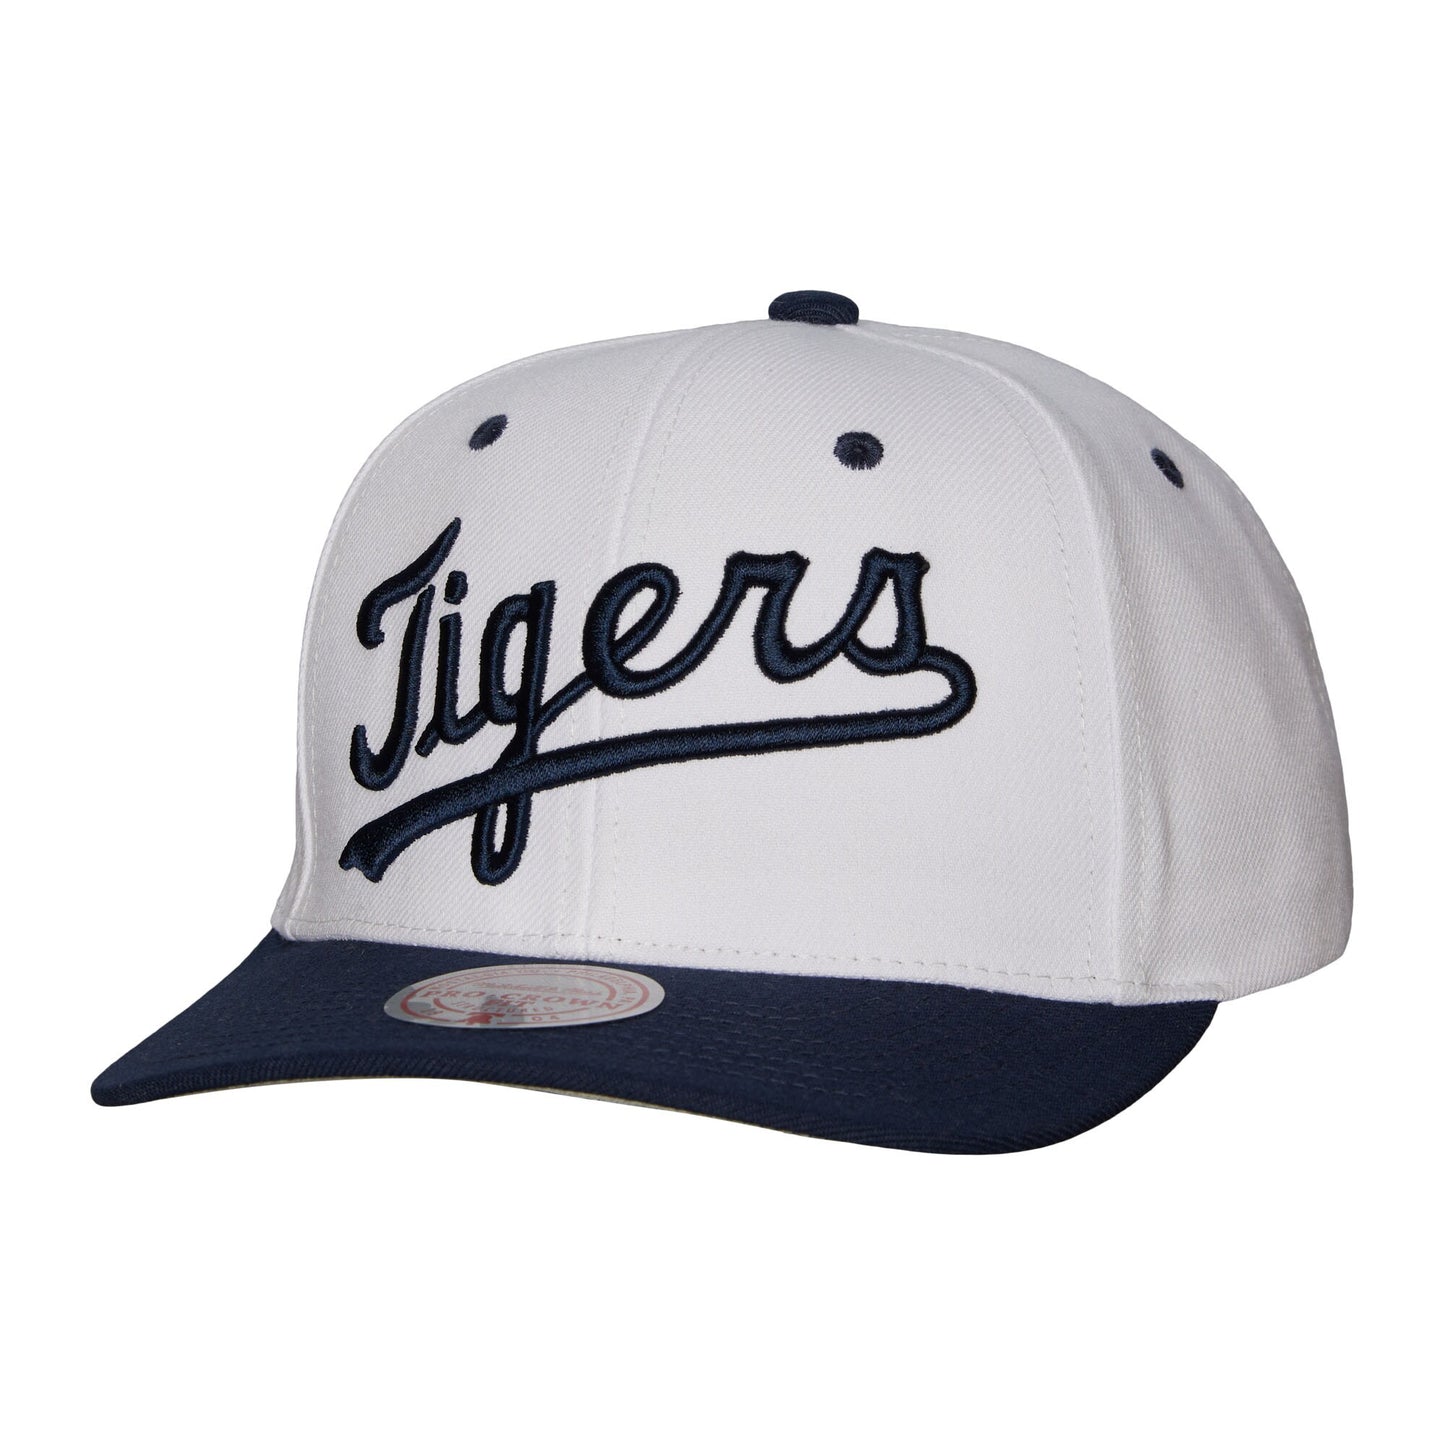 Detroit Tigers Mitchell & Ness Cooperstown Collection Pro Crown Snapback Hat - White